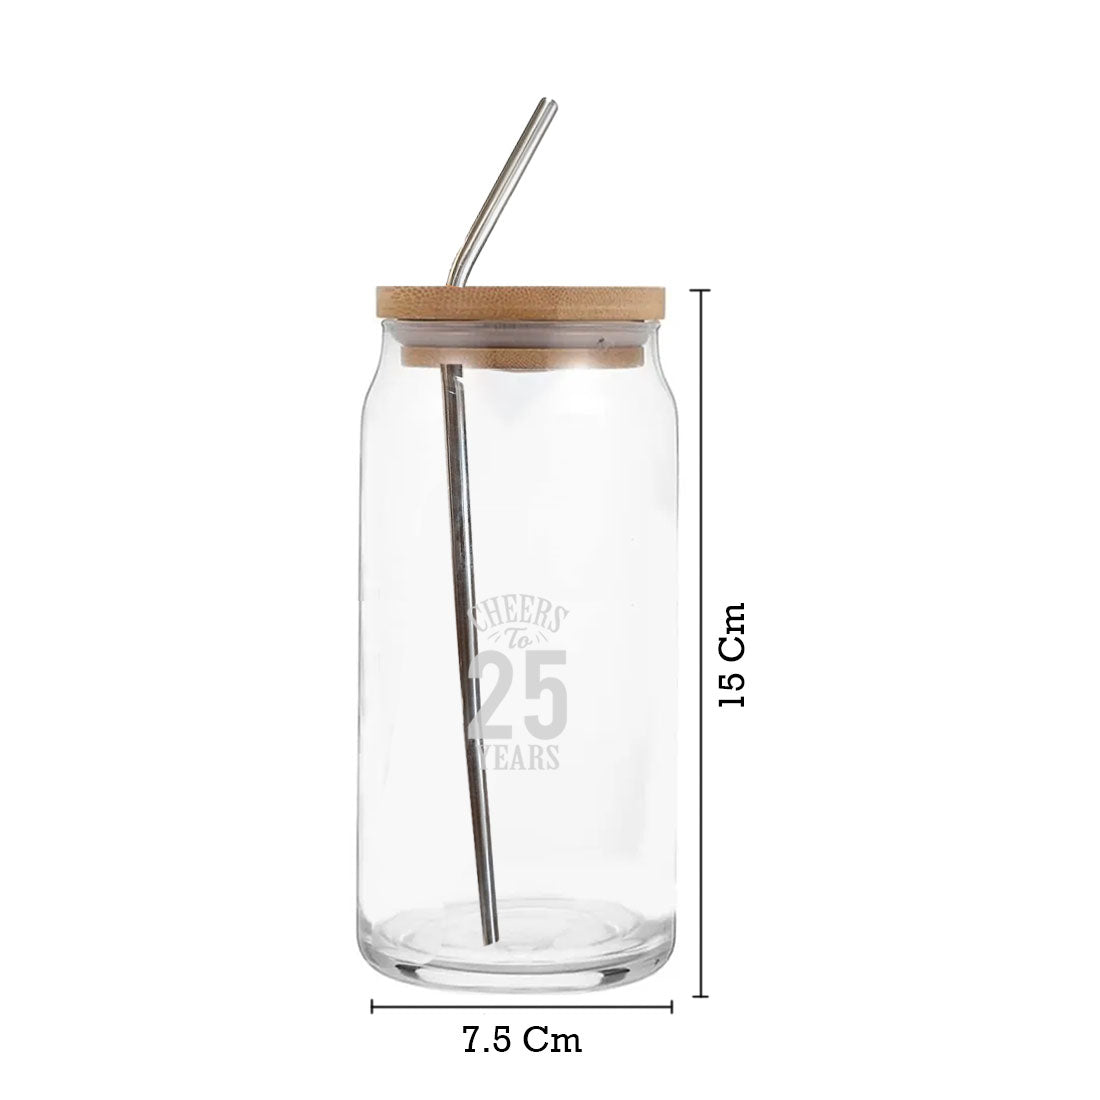 Nutcase Mason Jar with Metal Straw and Wooden Lid